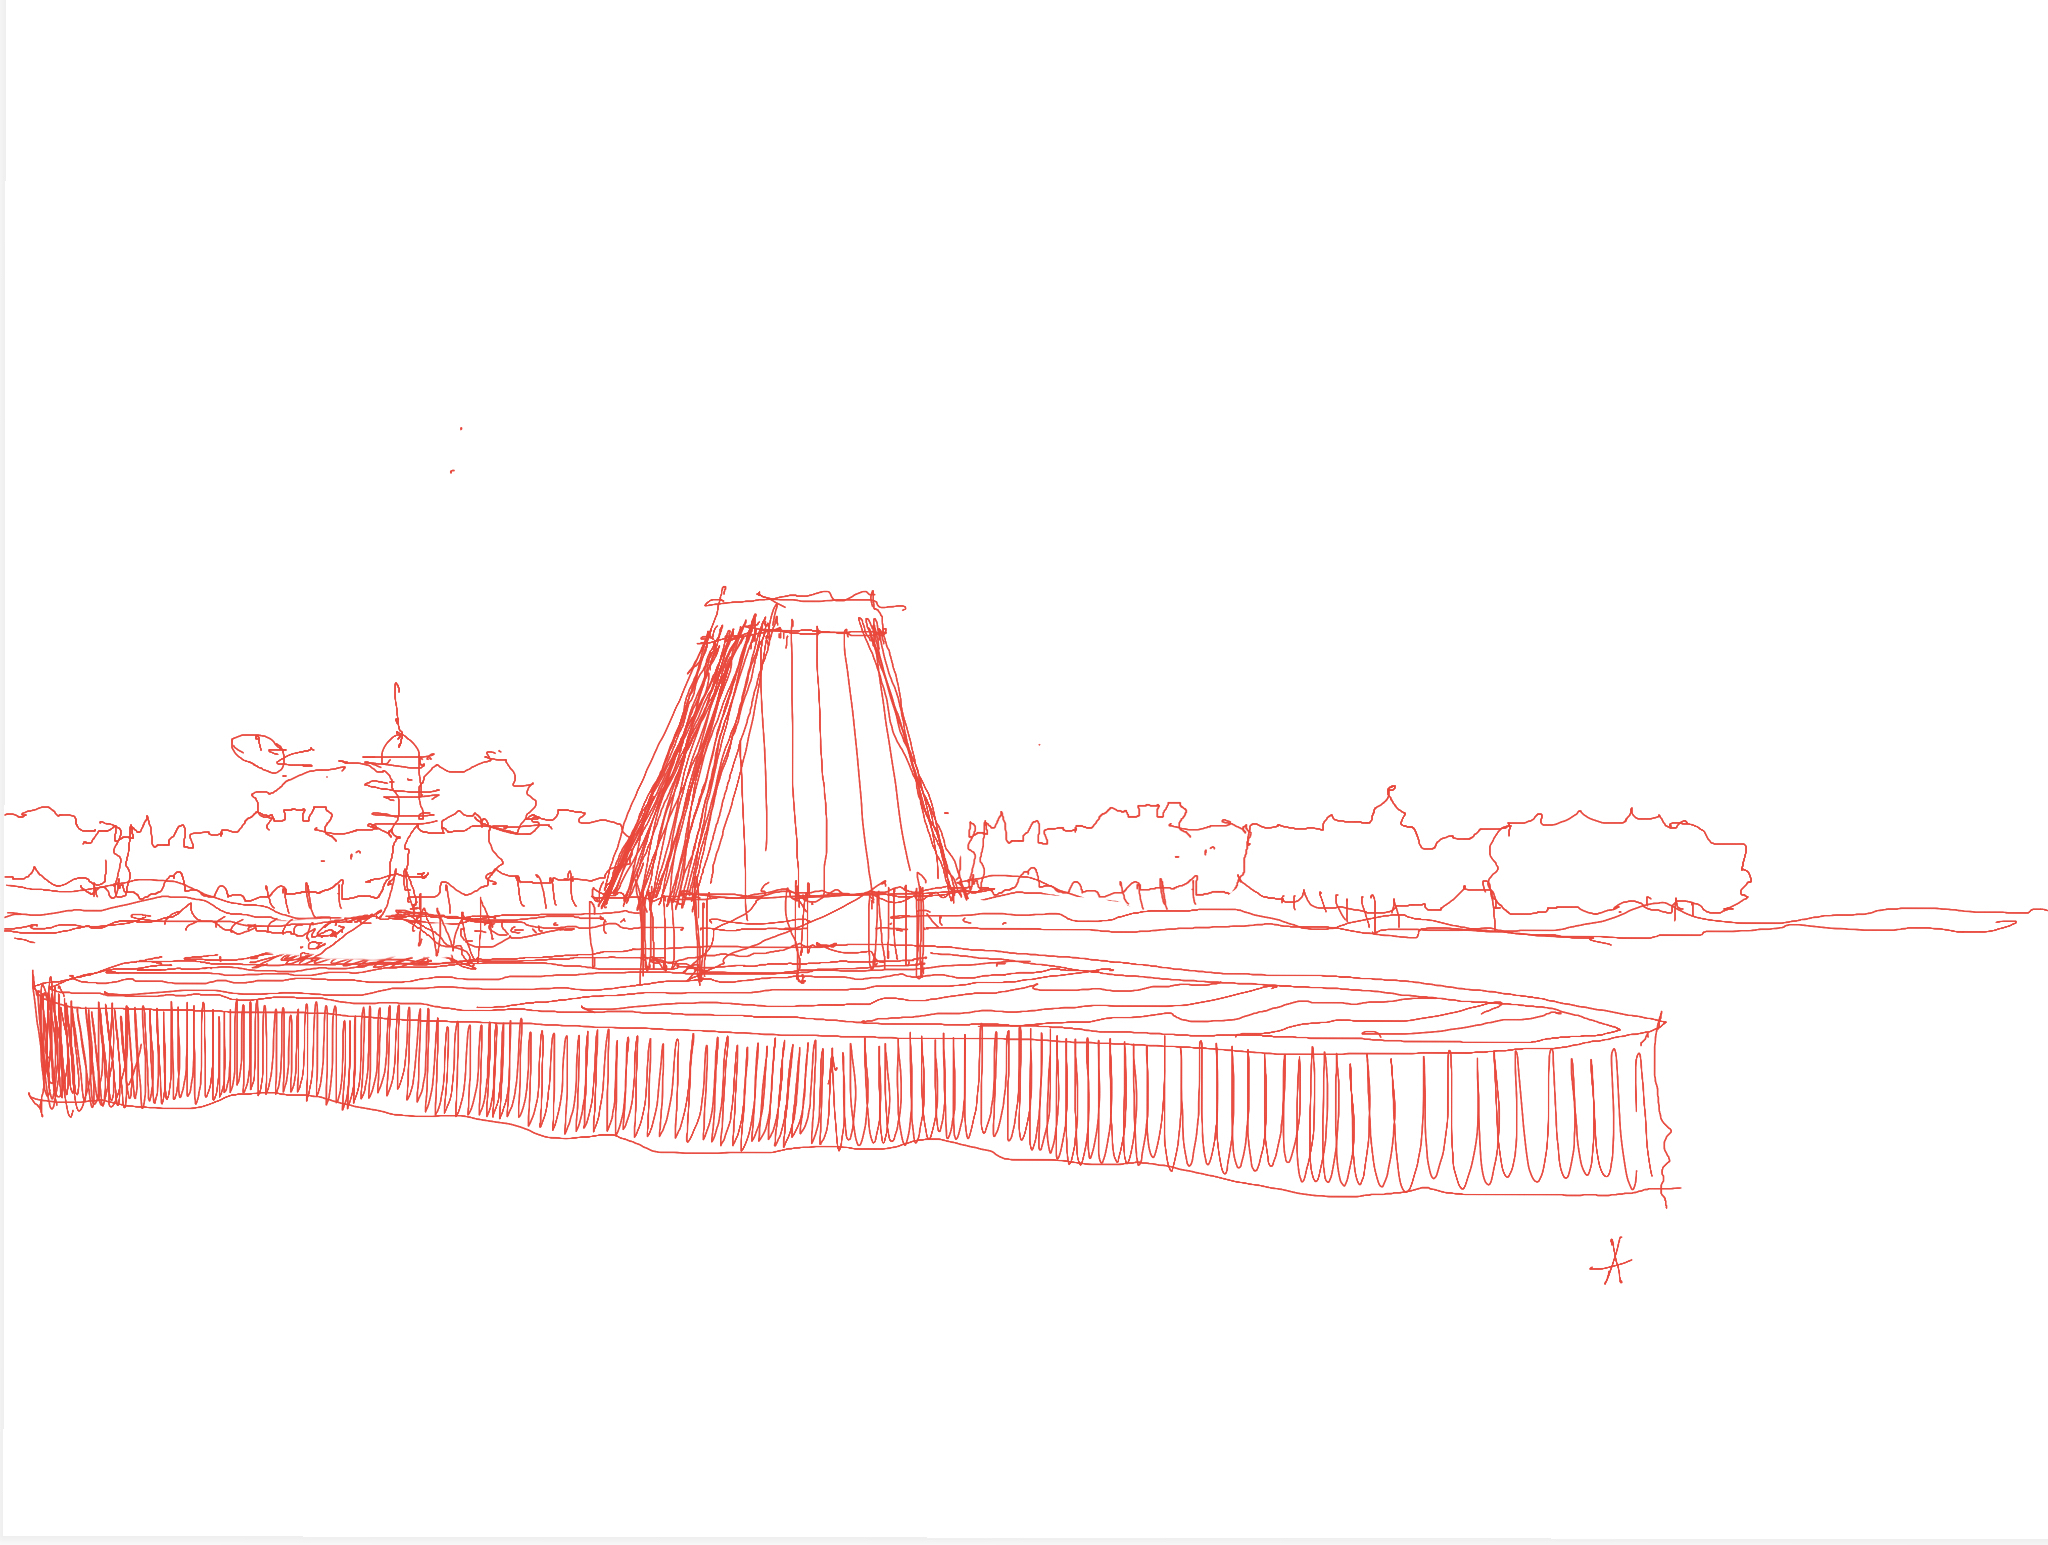 Rauhalinna, boat pavilion by the lake, sketch